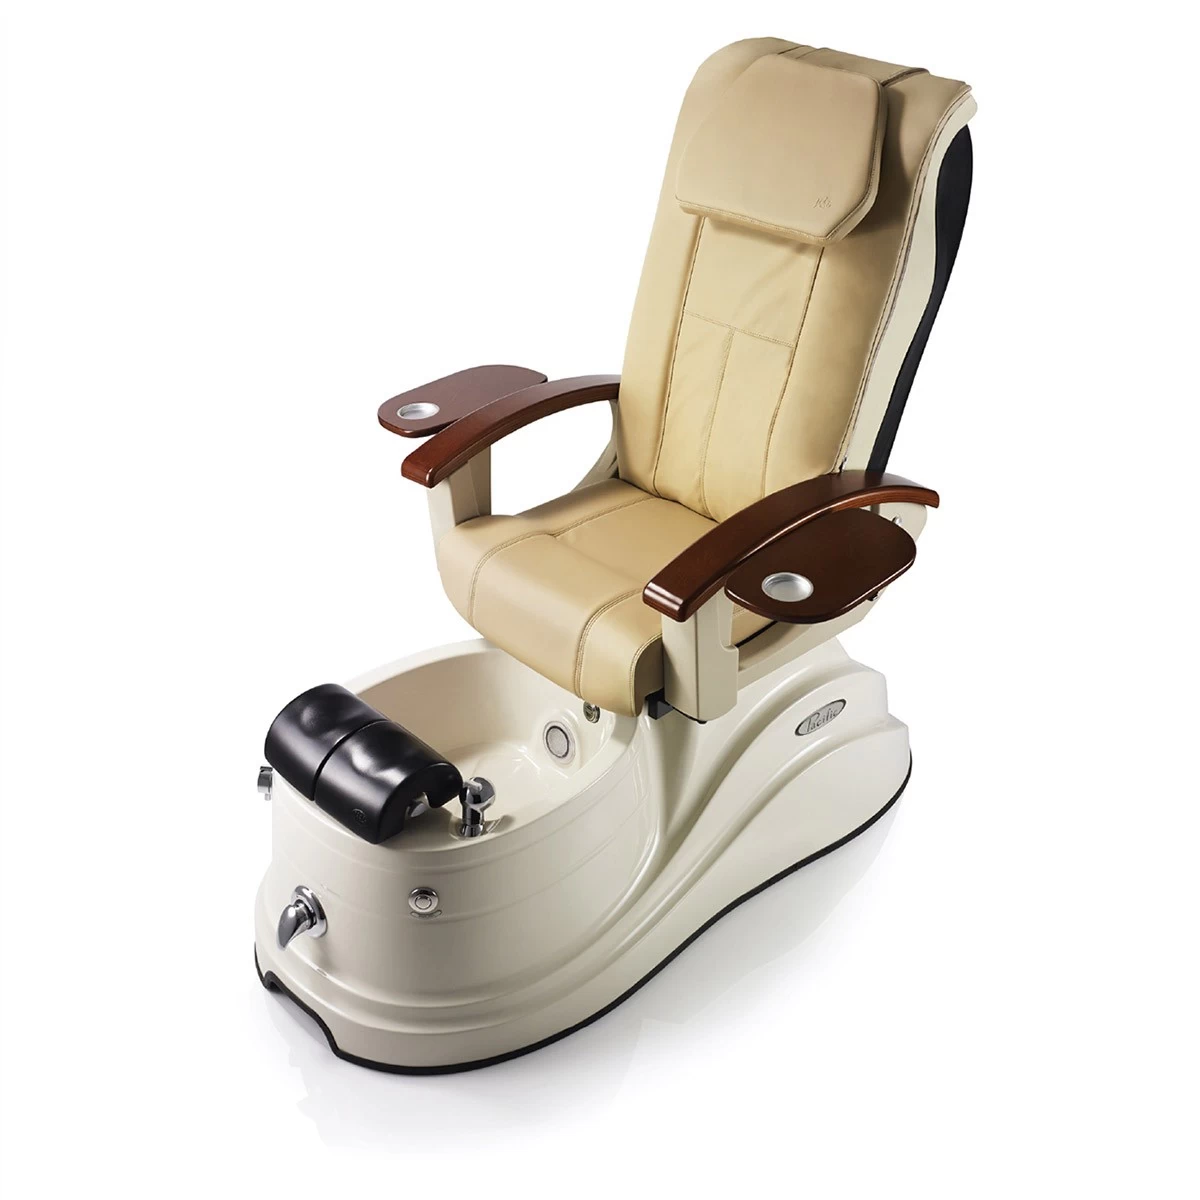 pedicure chair foot spa nail chair pedicure with pedicure chair manicure